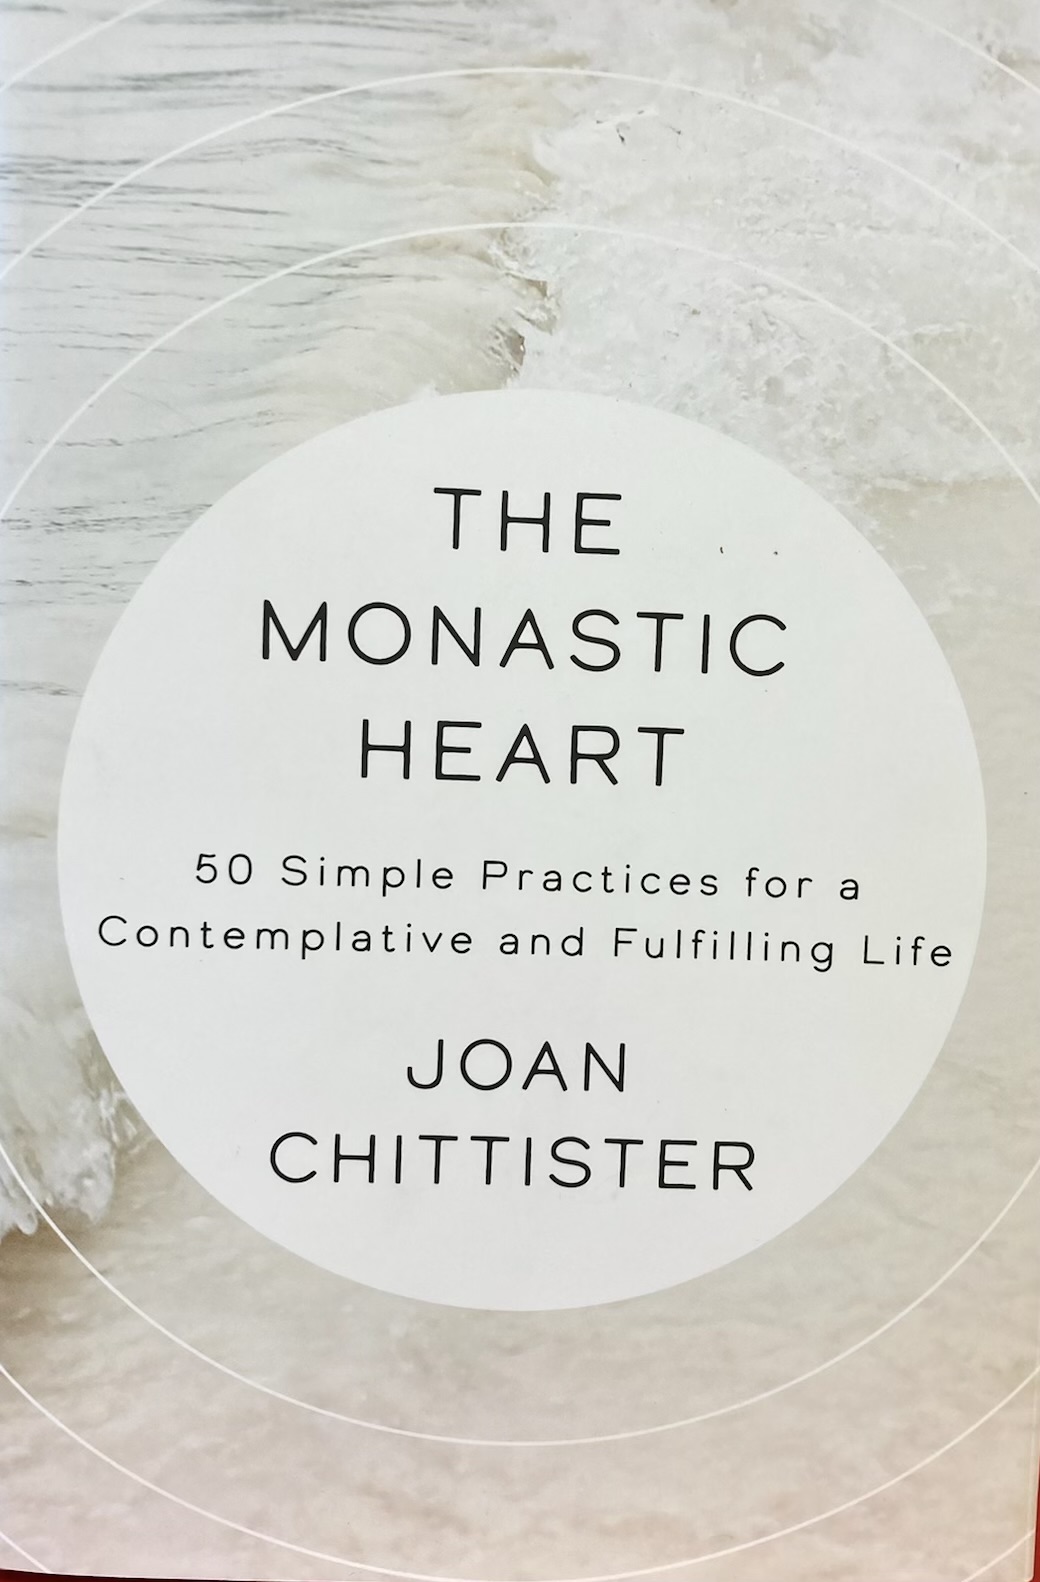 Monastic Heart: 50 Simple Practices for a Contemplative and Fulfilling Life